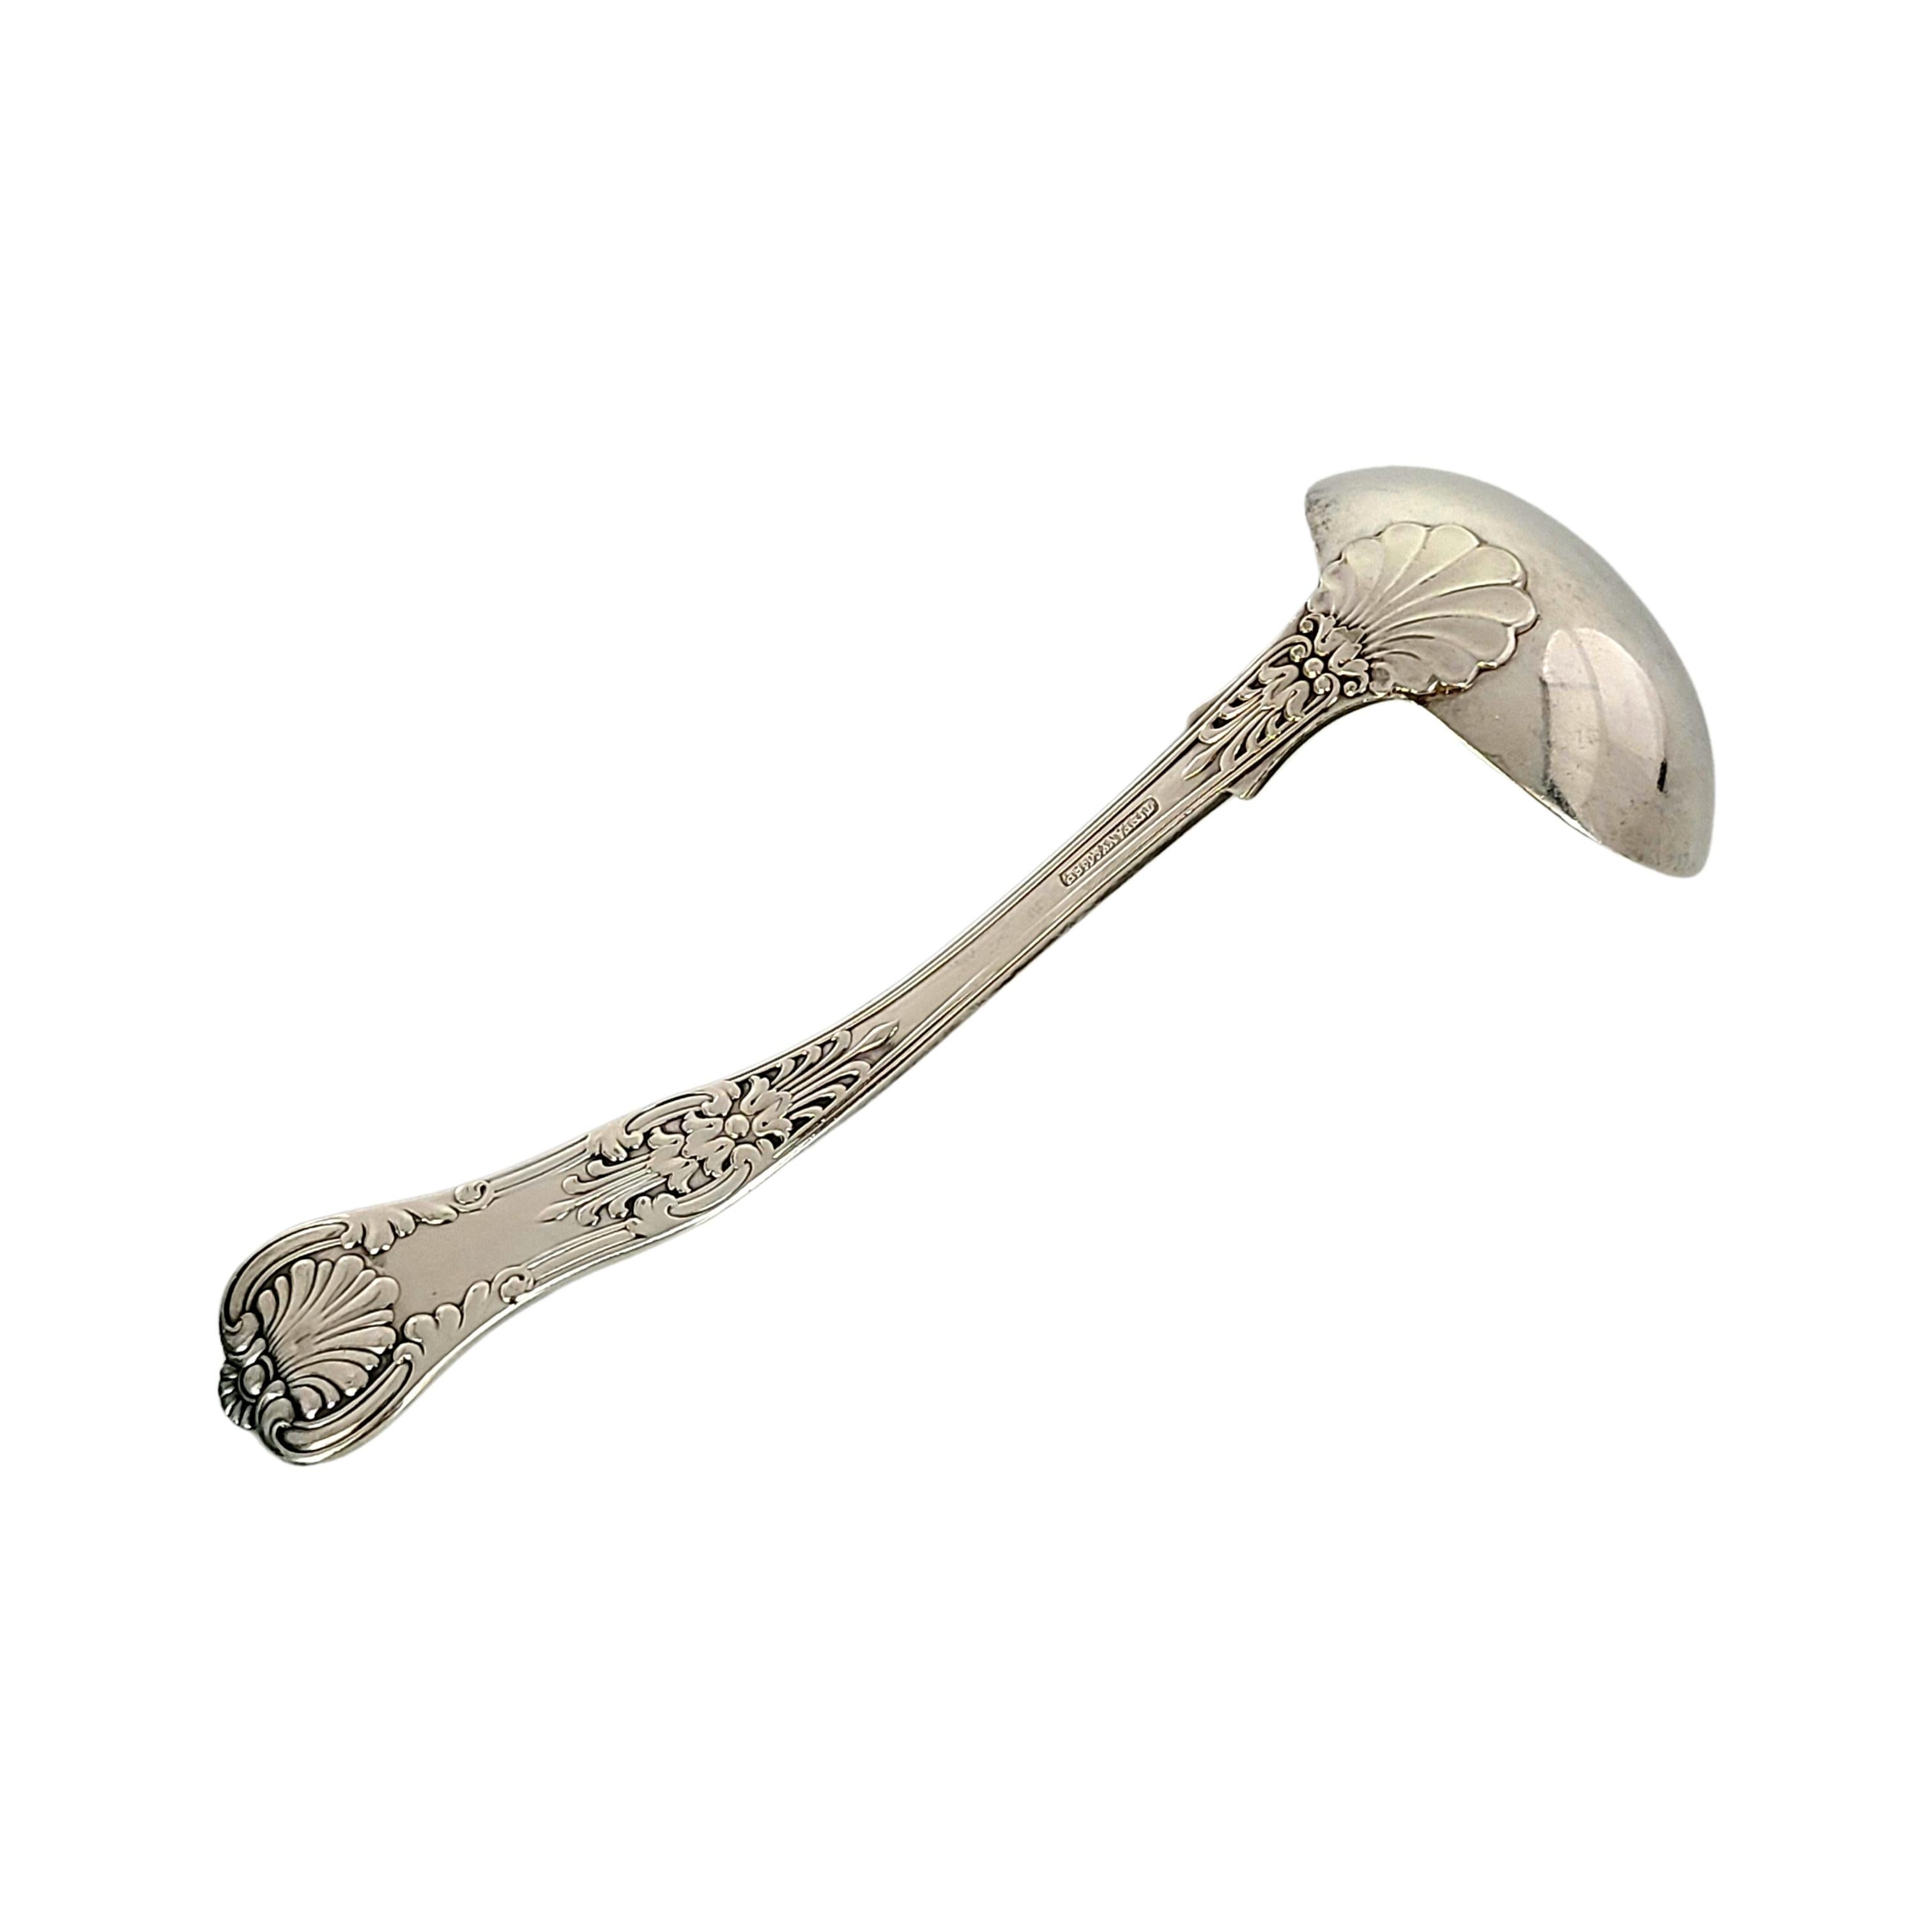 Silverplated gravy ladle by Tiffany & Co in the English King pattern.

No monogram.

Beautiful ladle in Tiffany's intricate and decorative version of a King pattern, which were very popular in the late 19th century. Tiffany box and pouch are not